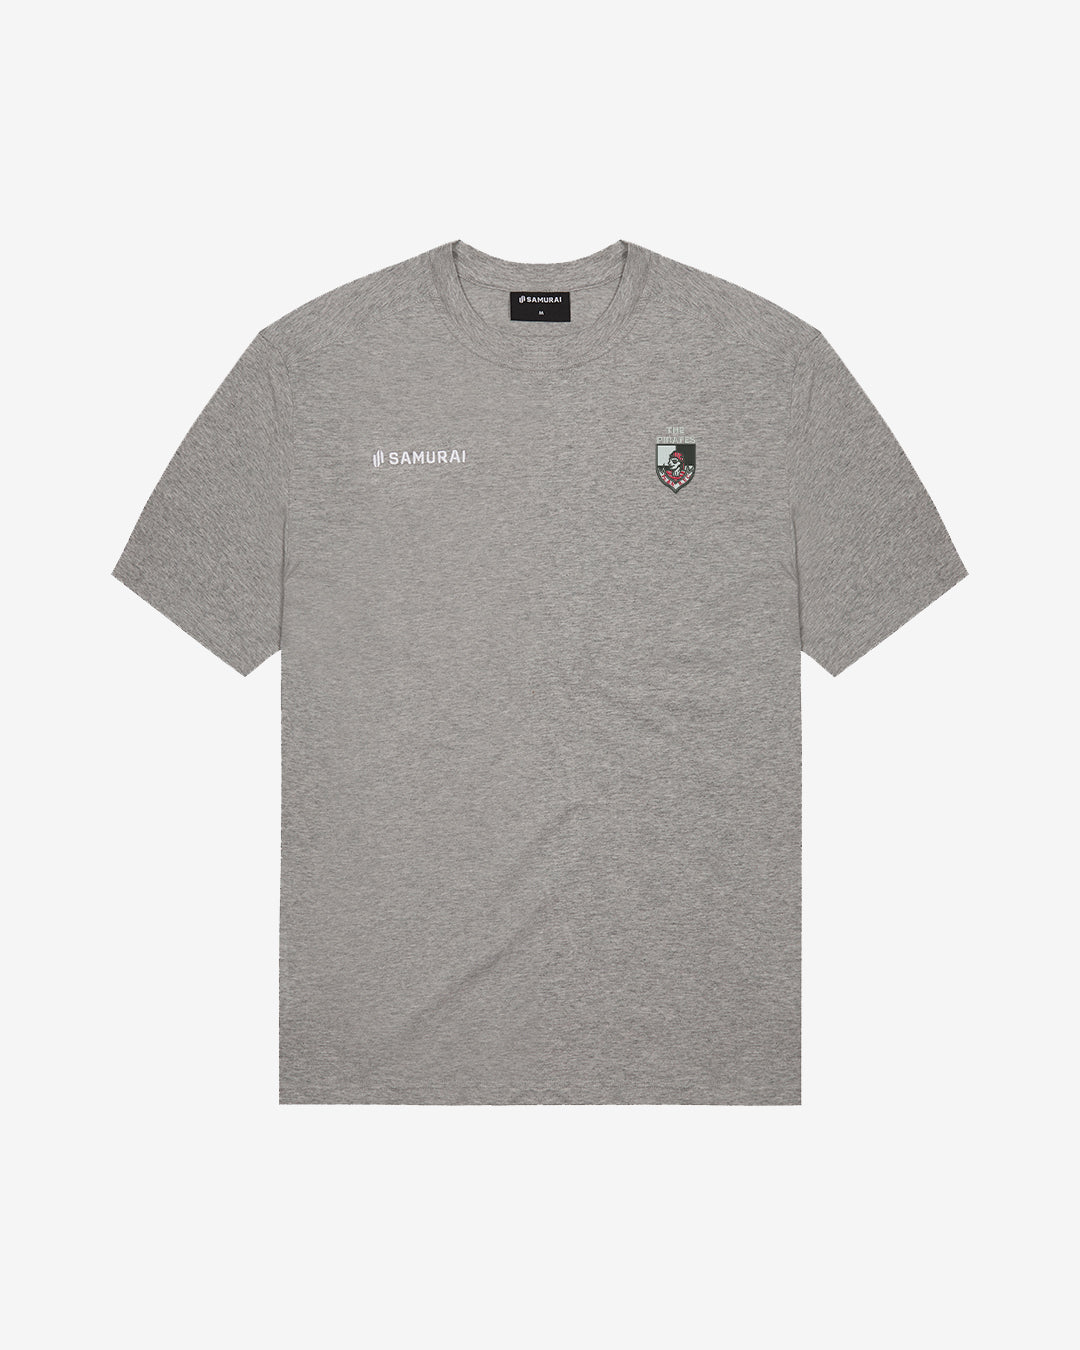 Penzance and Newlyn RFC - EP:0110 - Cotton Touch Tee - Grey